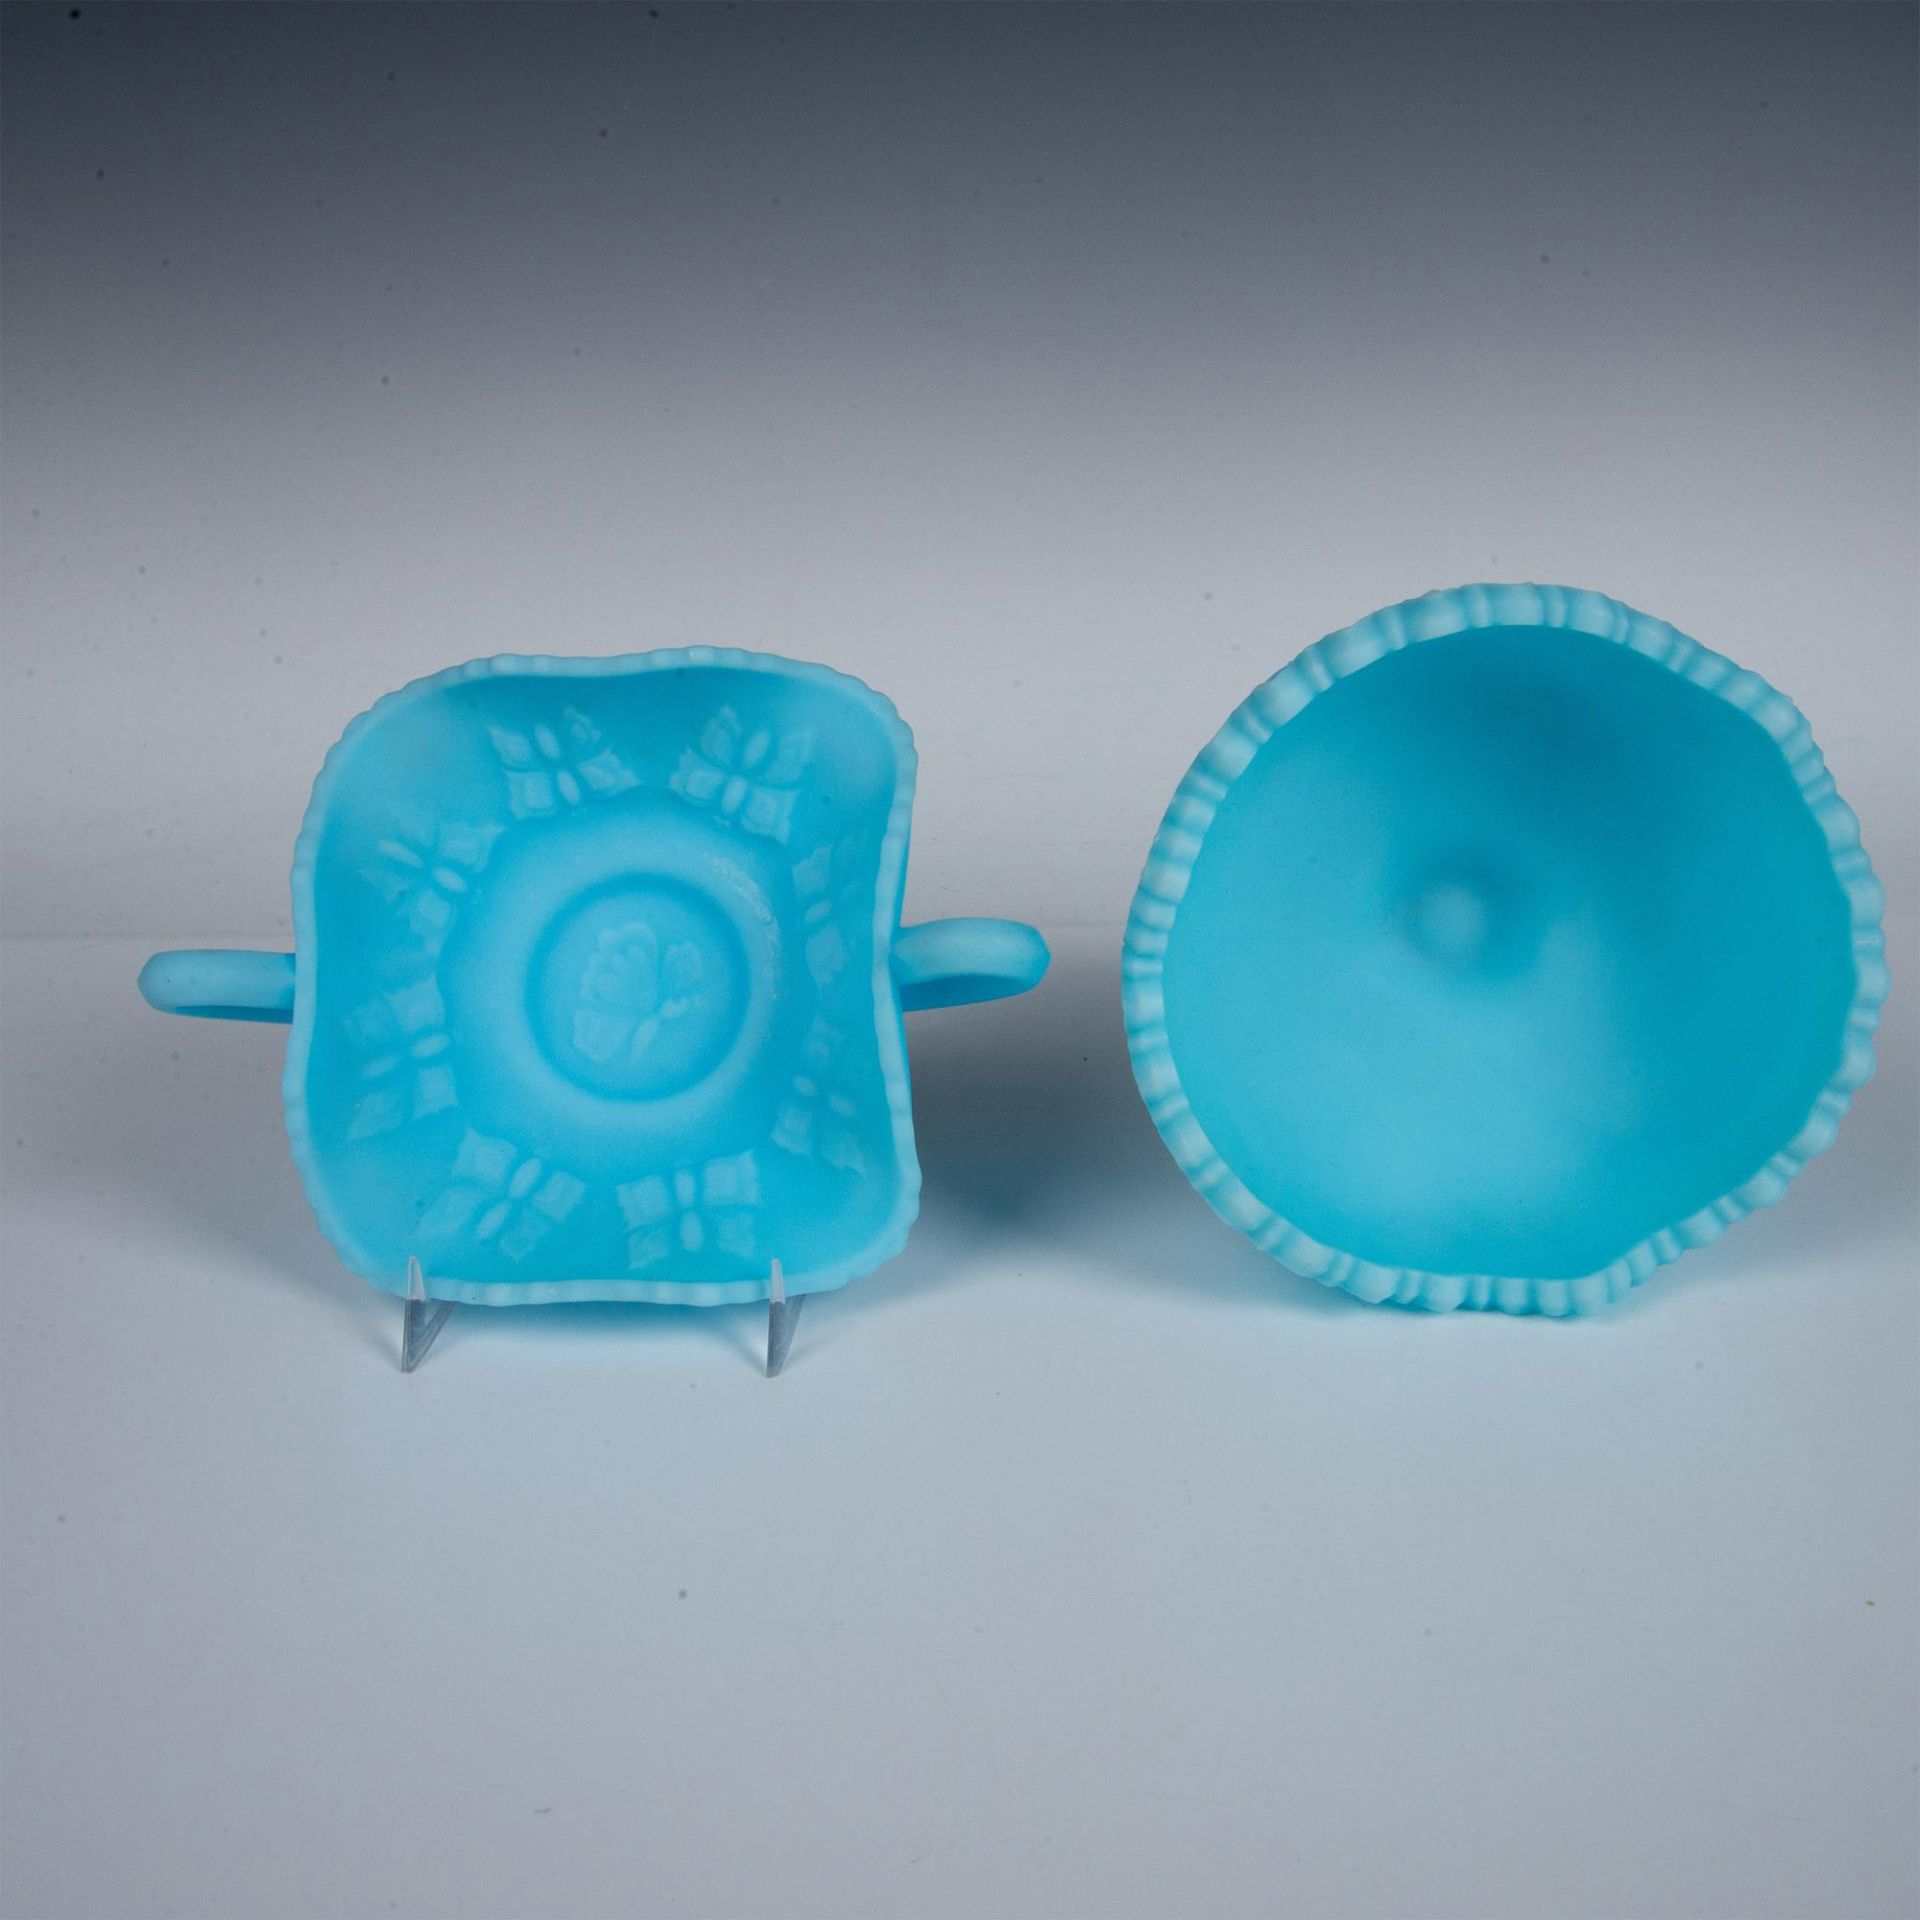 2pc Fenton Blue Satin Glass Serving Dishes - Image 3 of 4